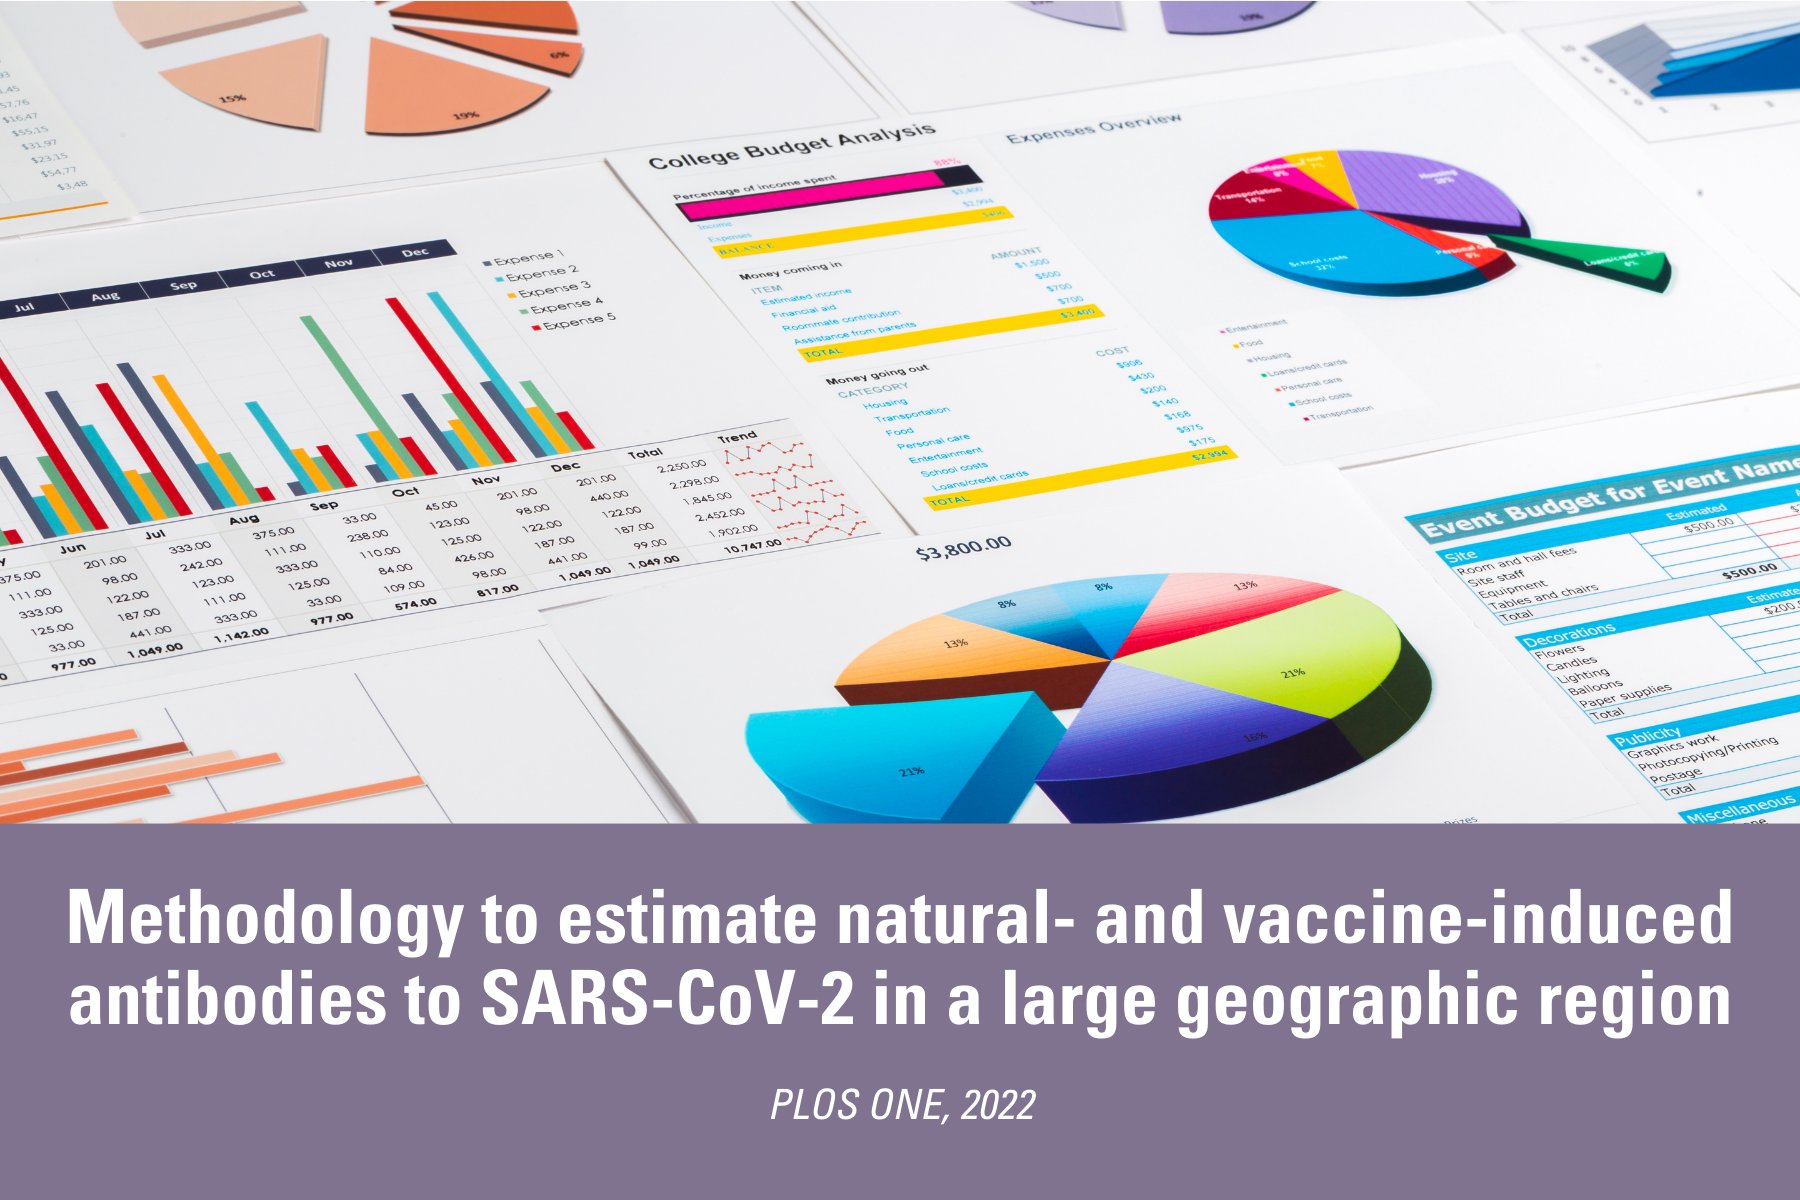 Methodology to estimate natural- and vaccine-induced antibodies to SARS-CoV-2 in a large geographic region